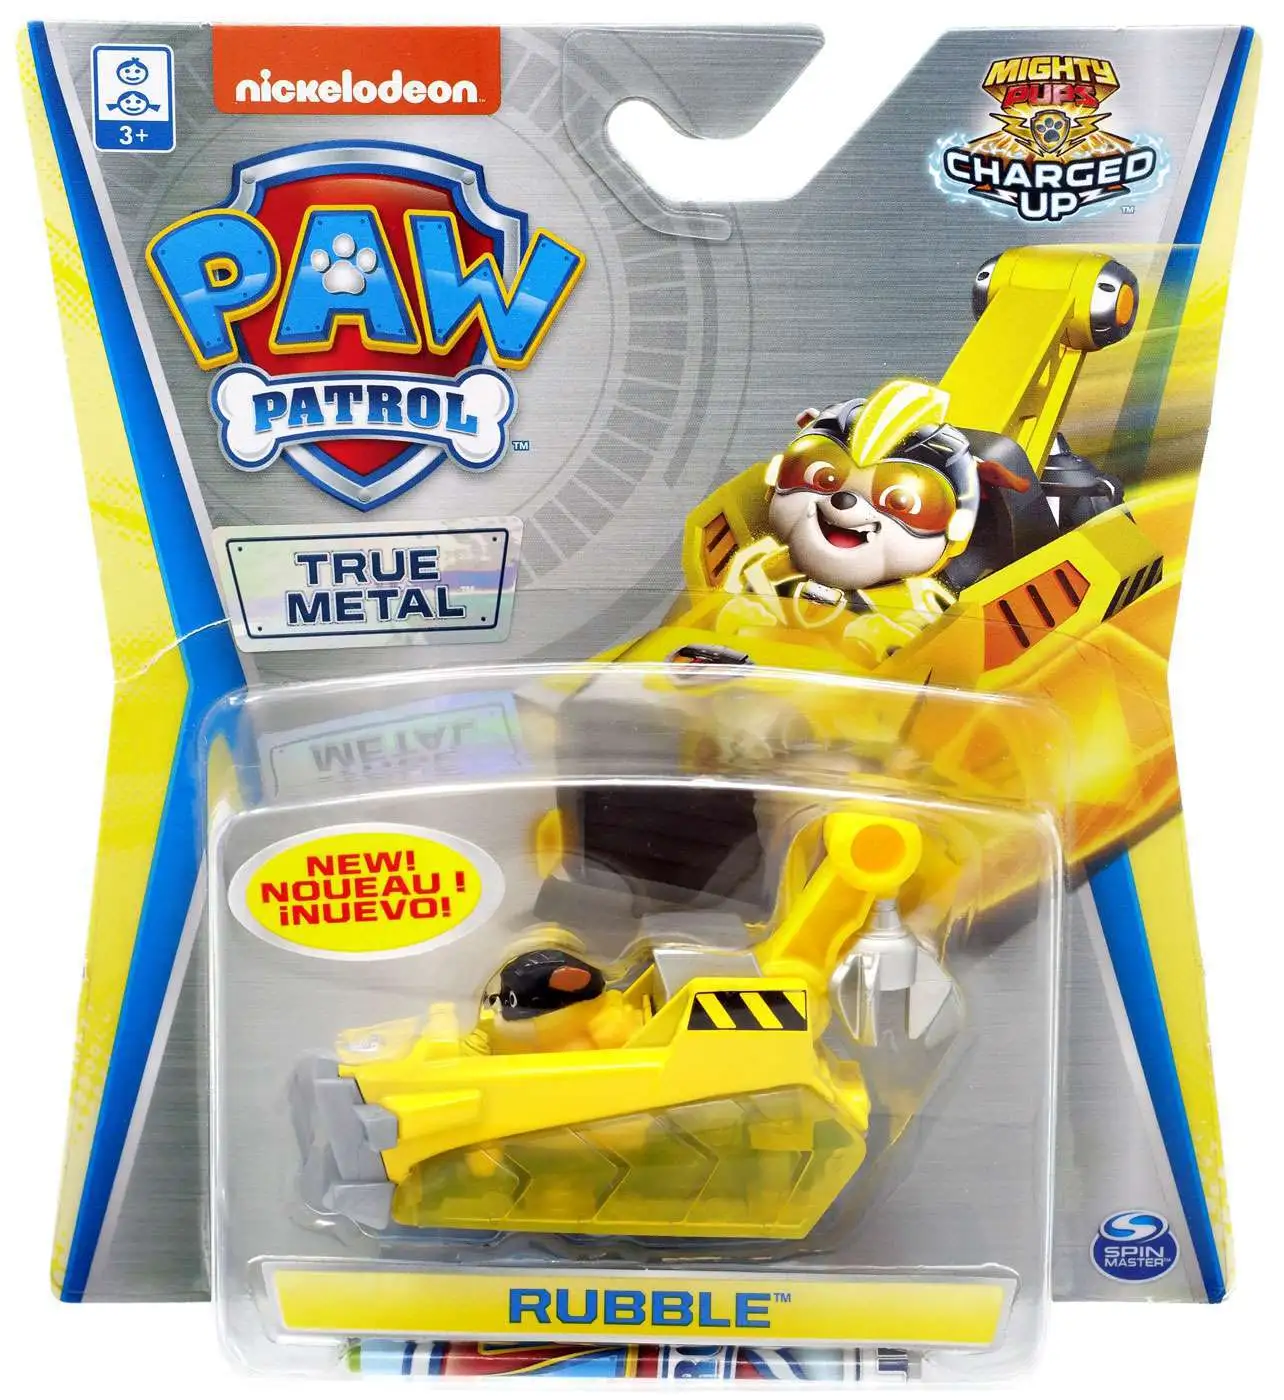 PAW Patrol Mighty Pups Charged Up Rubble Deluxe Vehicle 